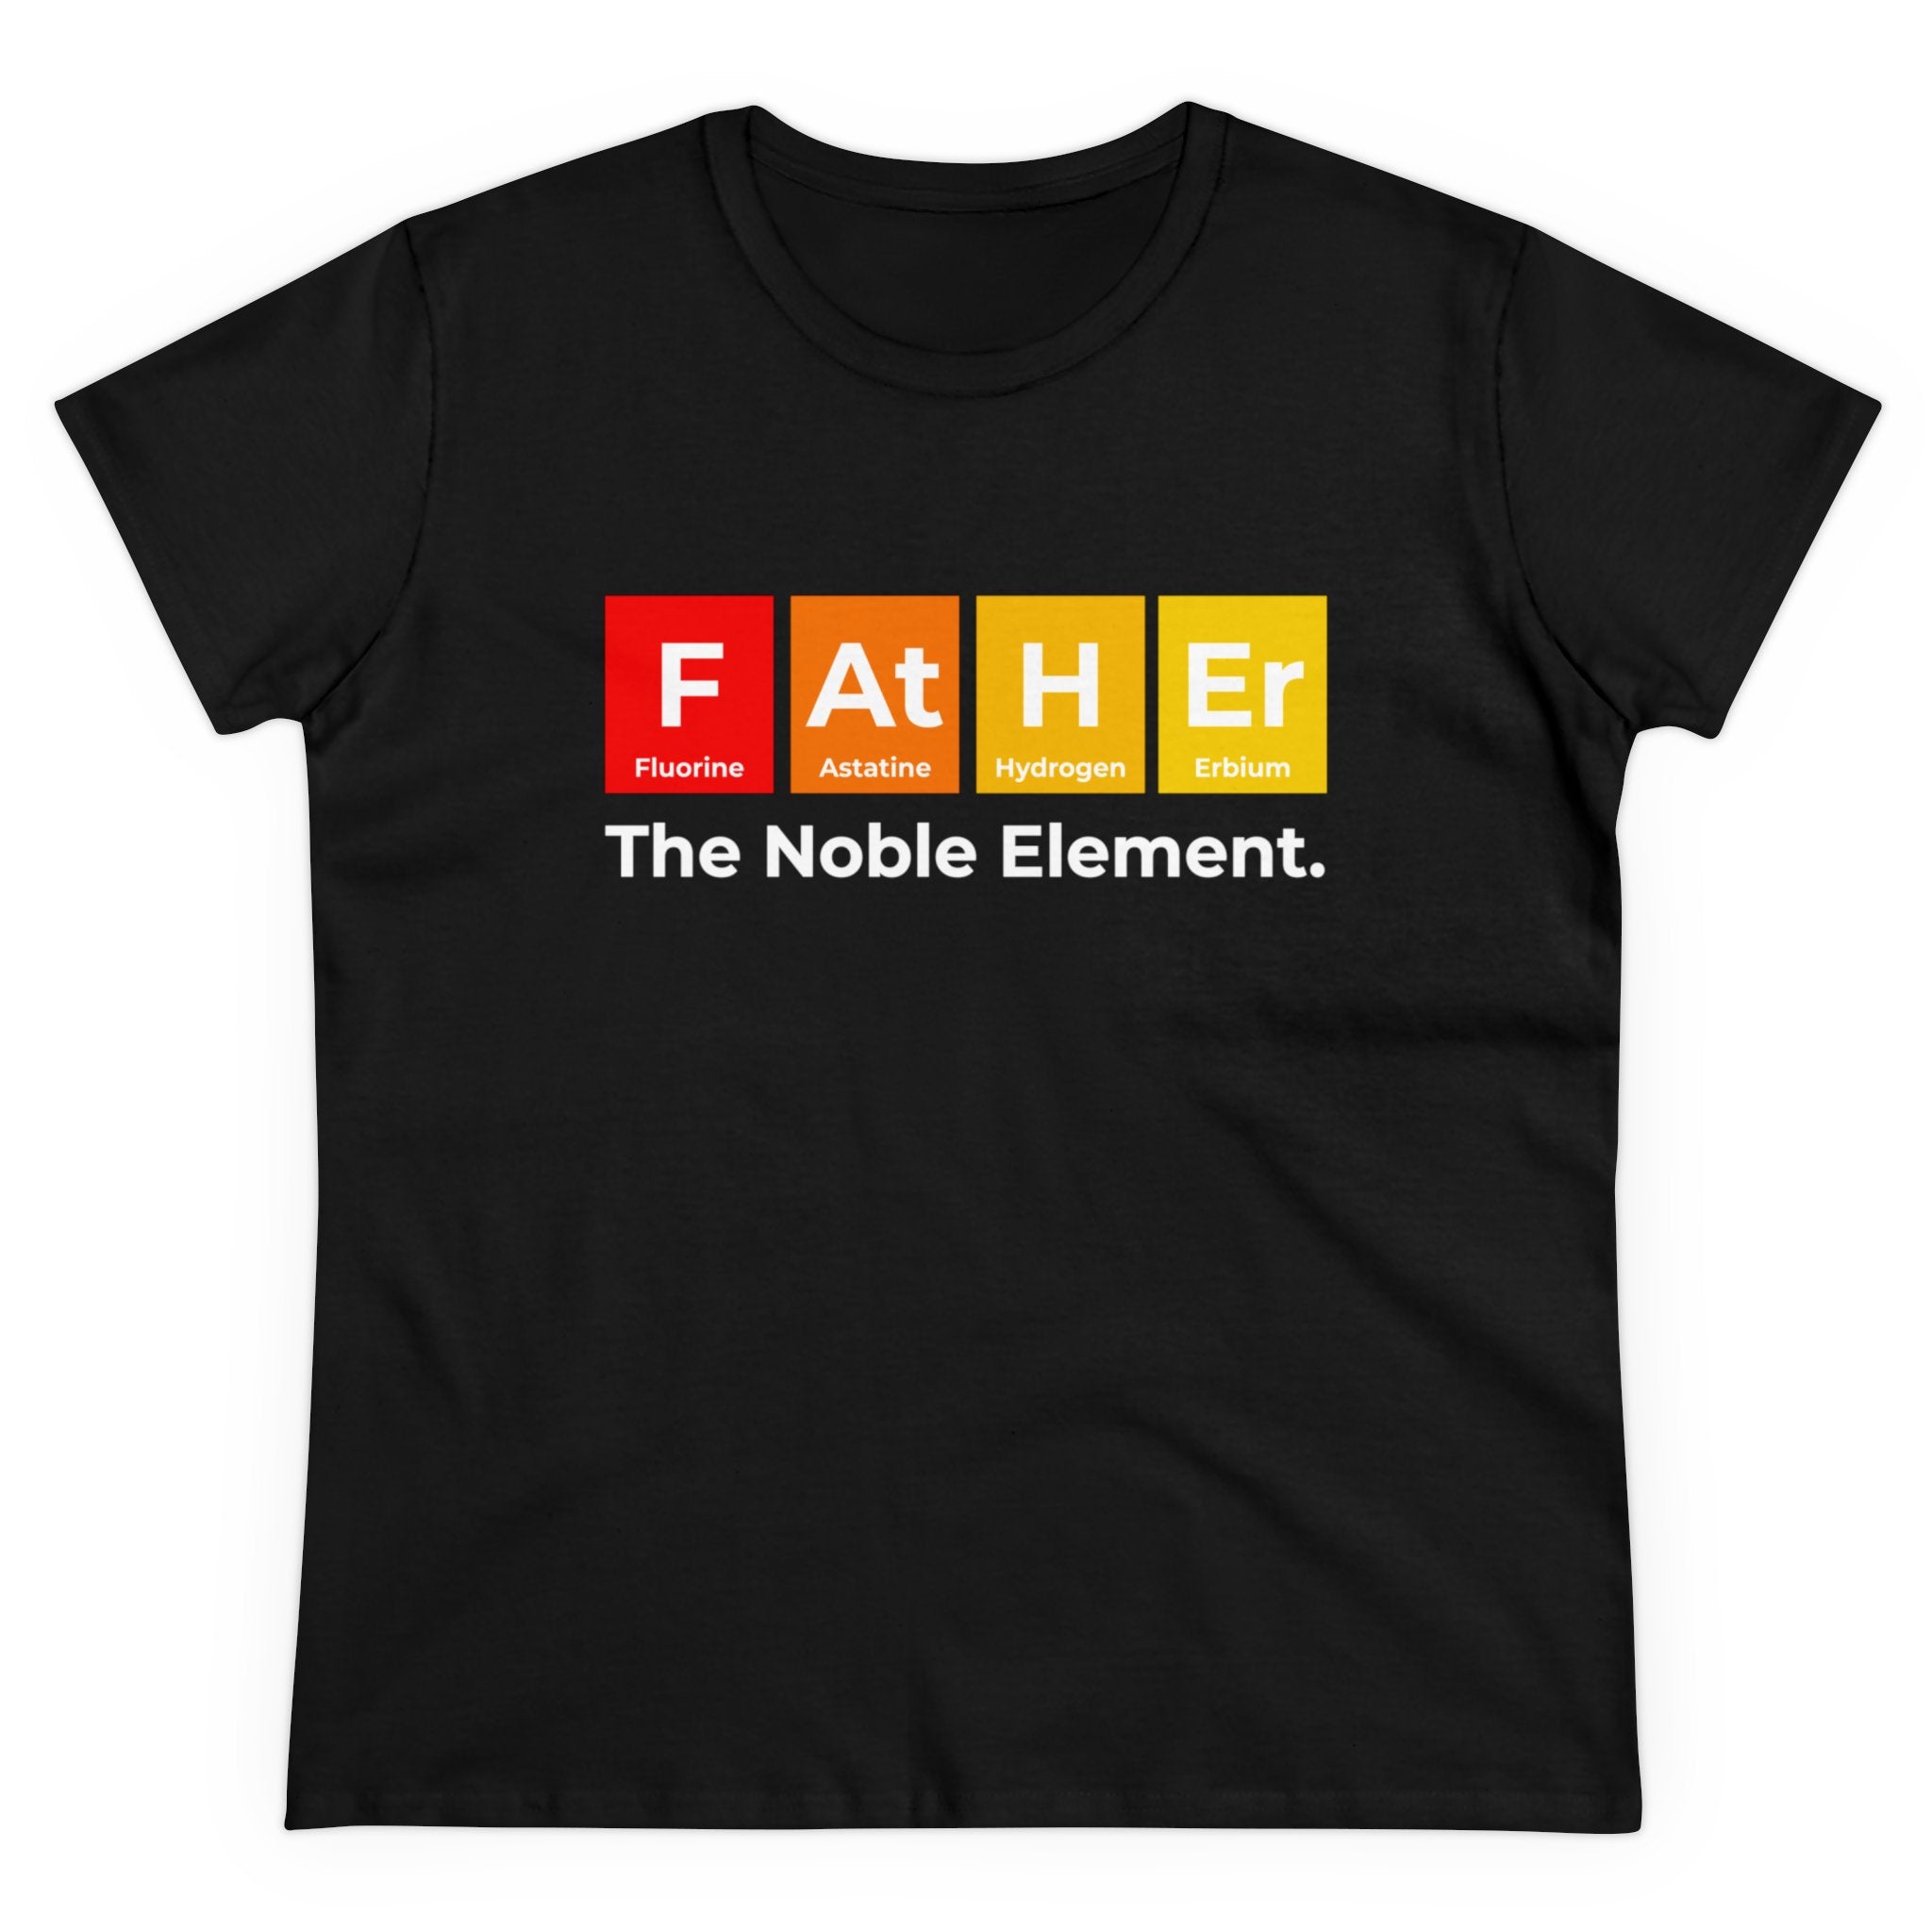 Father Graphic - Women's Tee featuring a comfortable cotton design with a periodic table spelling "FATHER" using elements Fluorine (F), Astatine (At), Hydrogen (H), and Erbium (Er). Text below reads "The Noble Element.